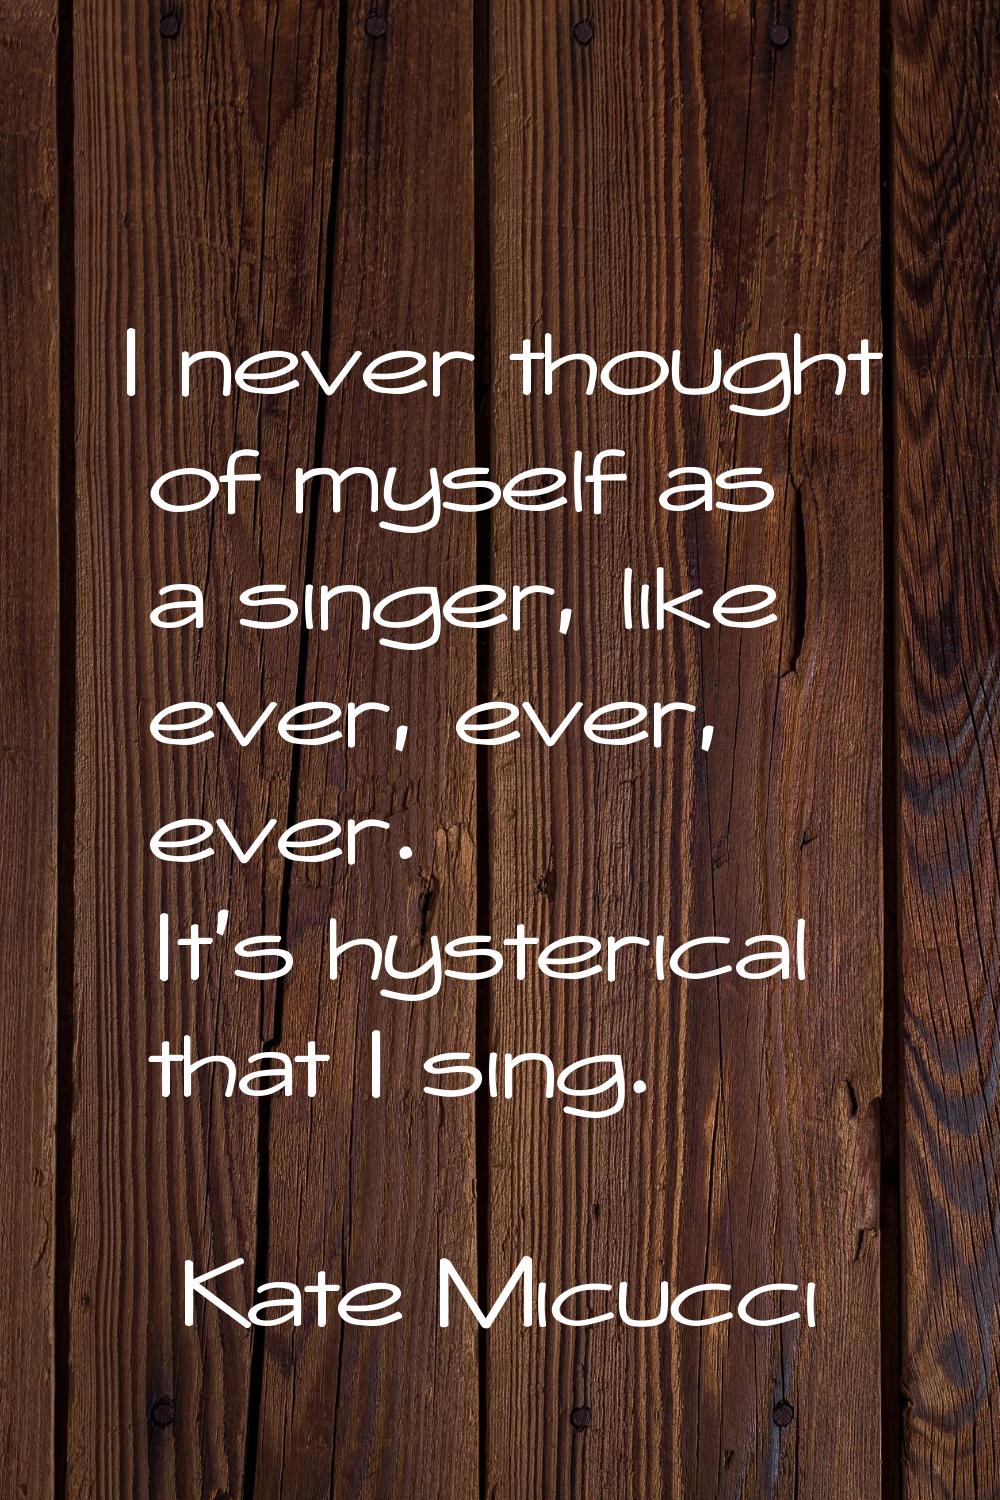 I never thought of myself as a singer, like ever, ever, ever. It's hysterical that I sing.